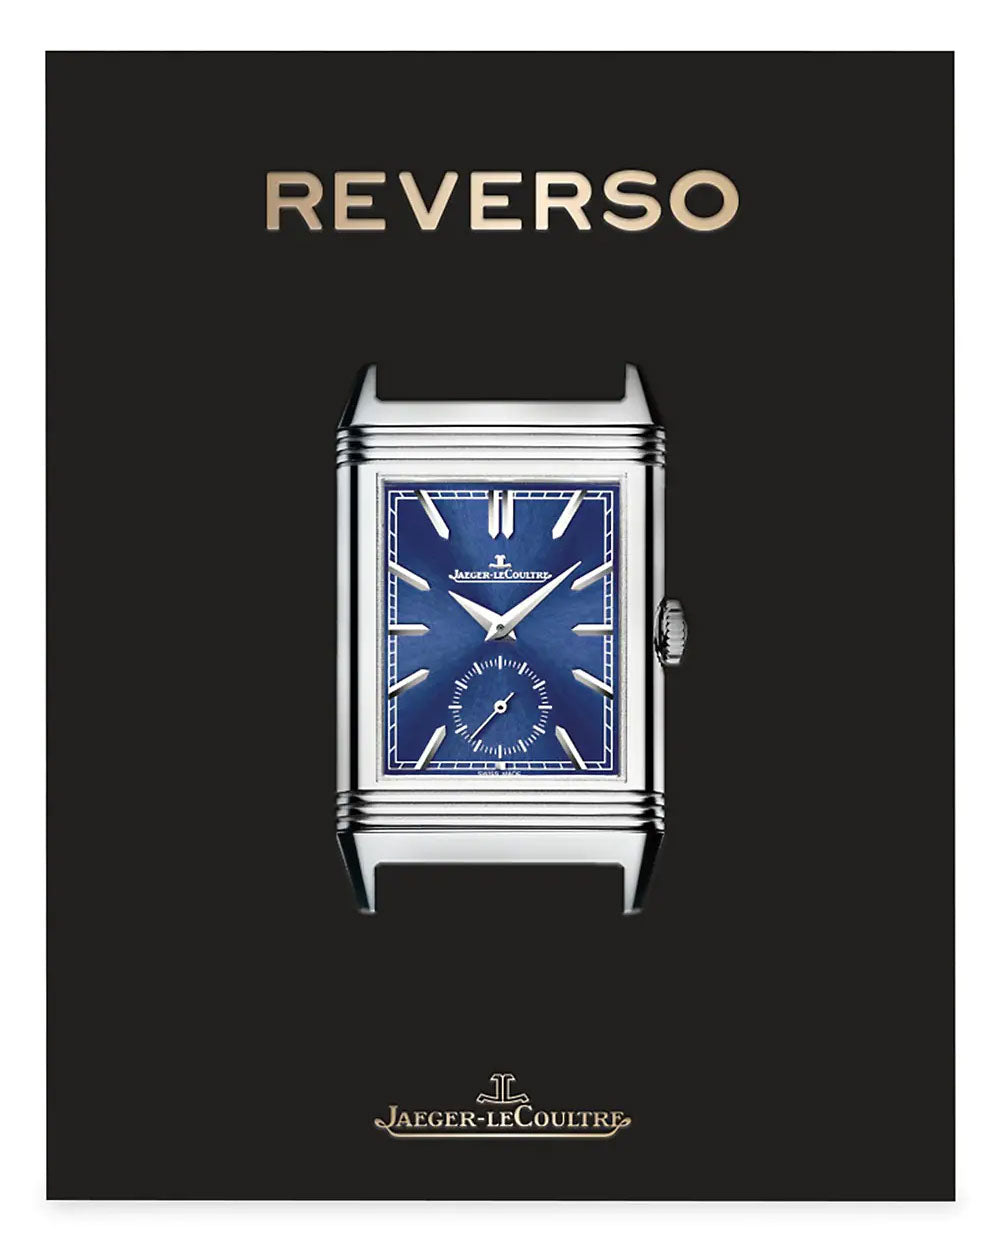 Jaefer-Le Coulture: Reverso Table Book